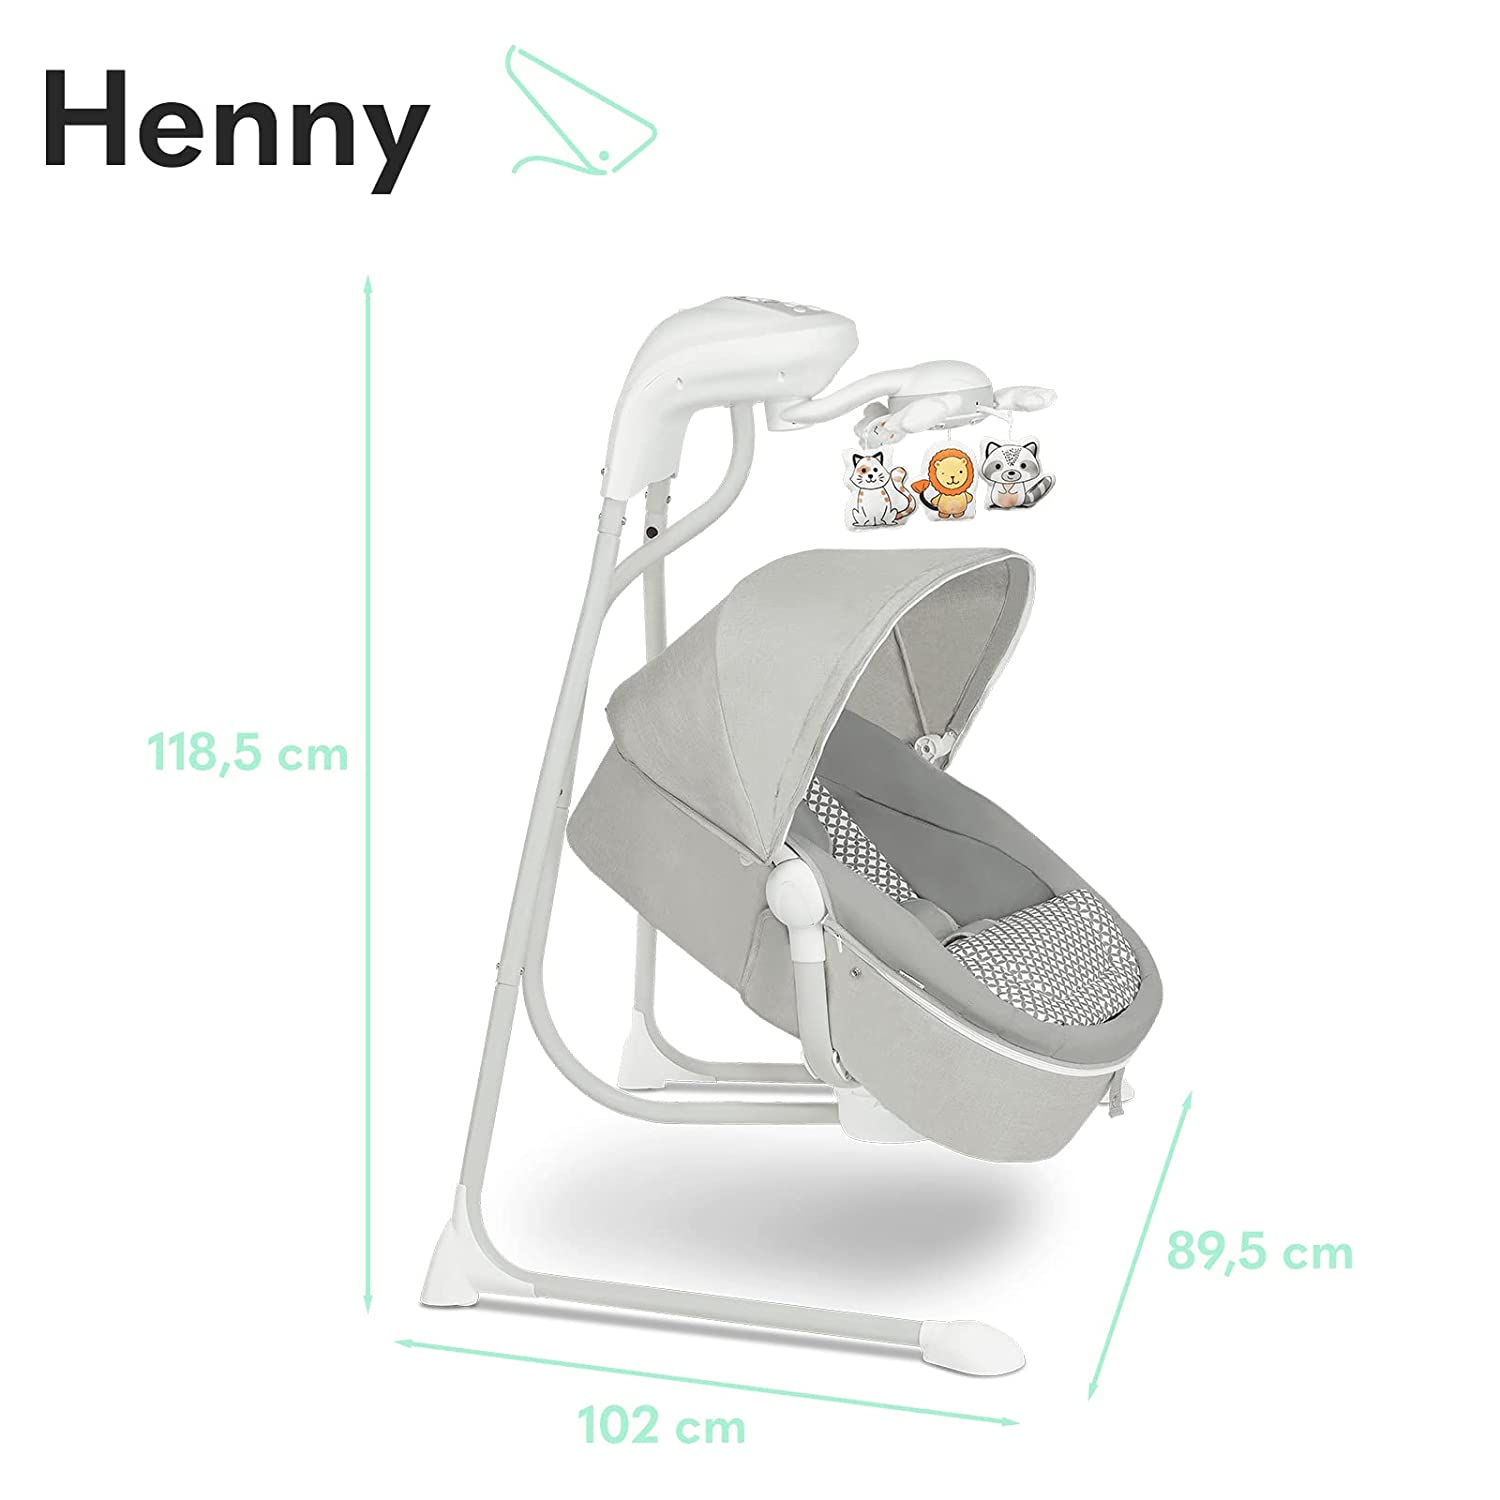 LIONELO Henny 3-in-1 Baby Rocker, Baby Swing and Baby Deck Chair, Electric Baby Rocker with Reclining Function, 10 Melodies, Carousel, USB Port, Mosquito Net (Grey)